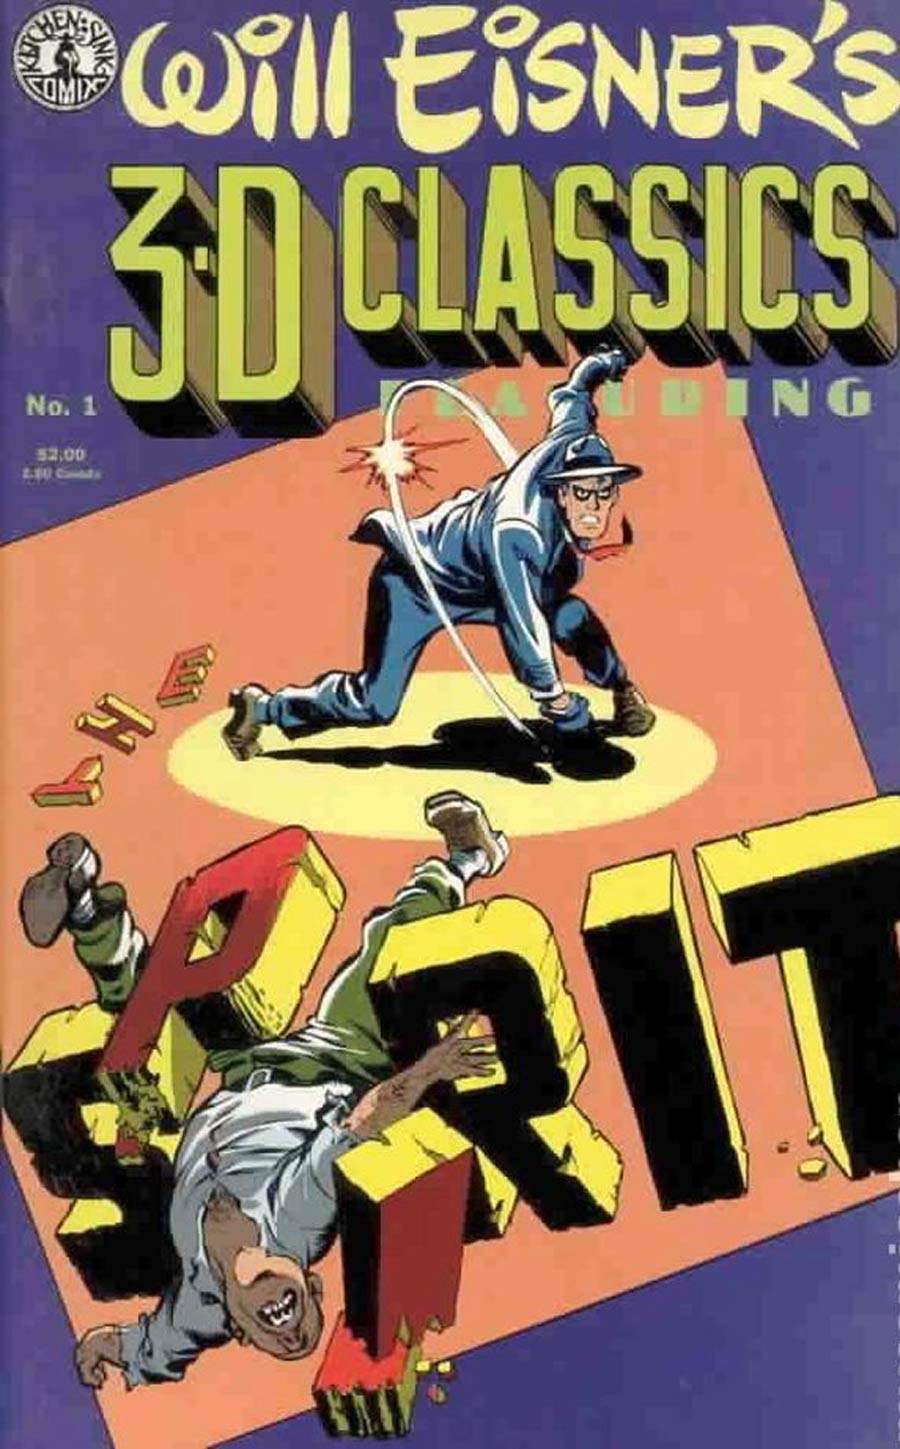 Will Eisners 3-D Classics Featuring The Spirit #1 Cover B Without Glasses